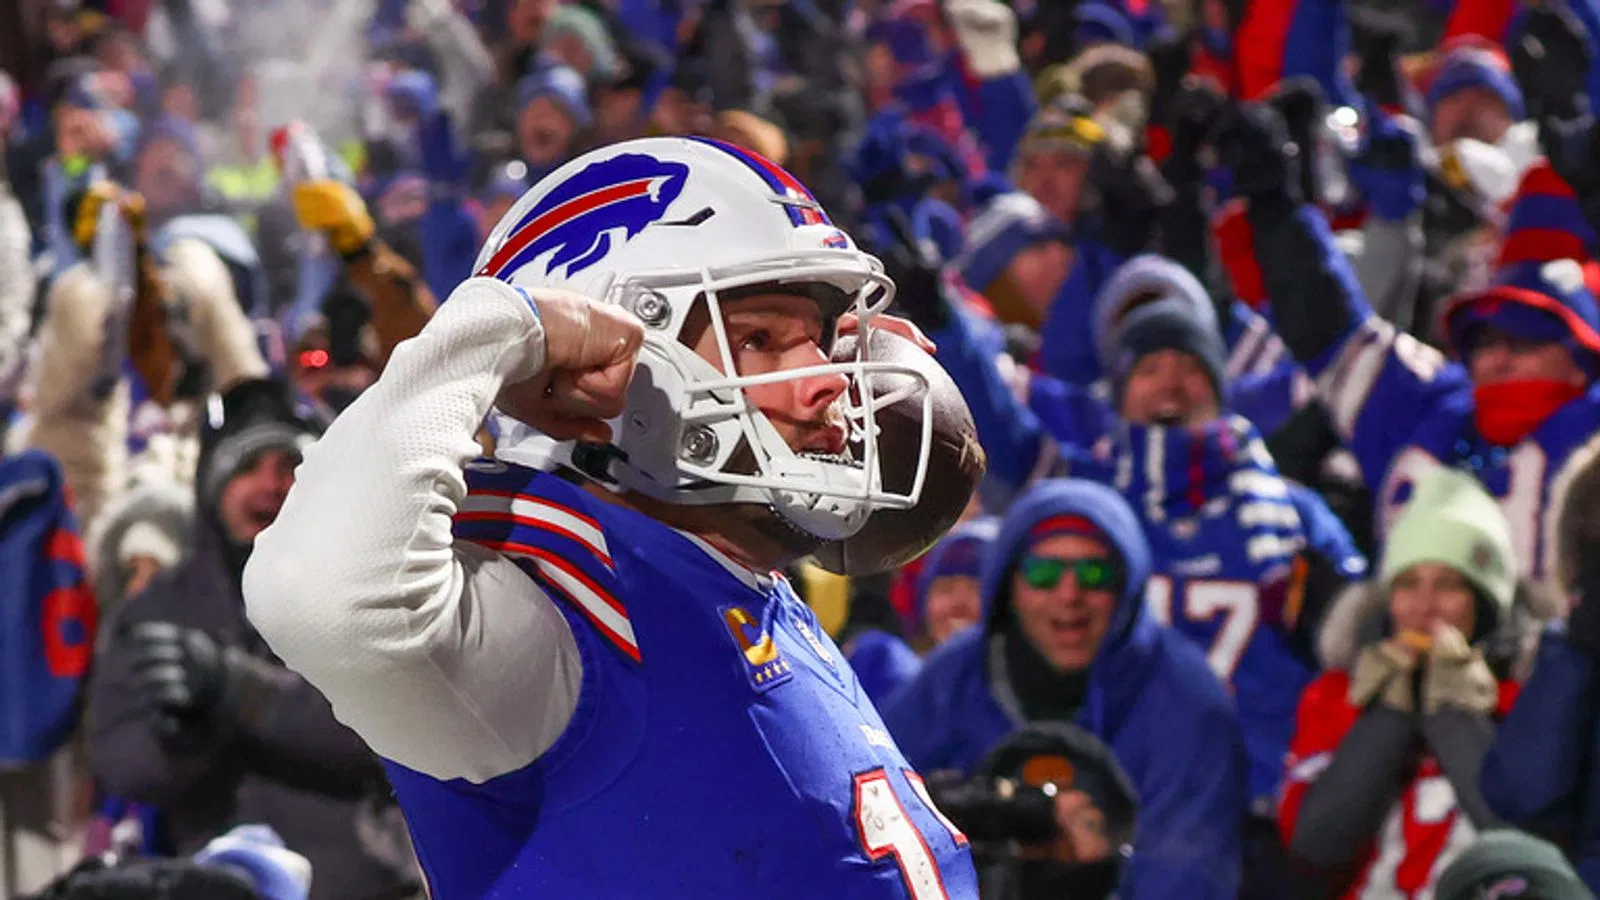 The Buffalo Bills' Draft Pick Could Be Their Ticket to Super Bowl Glory